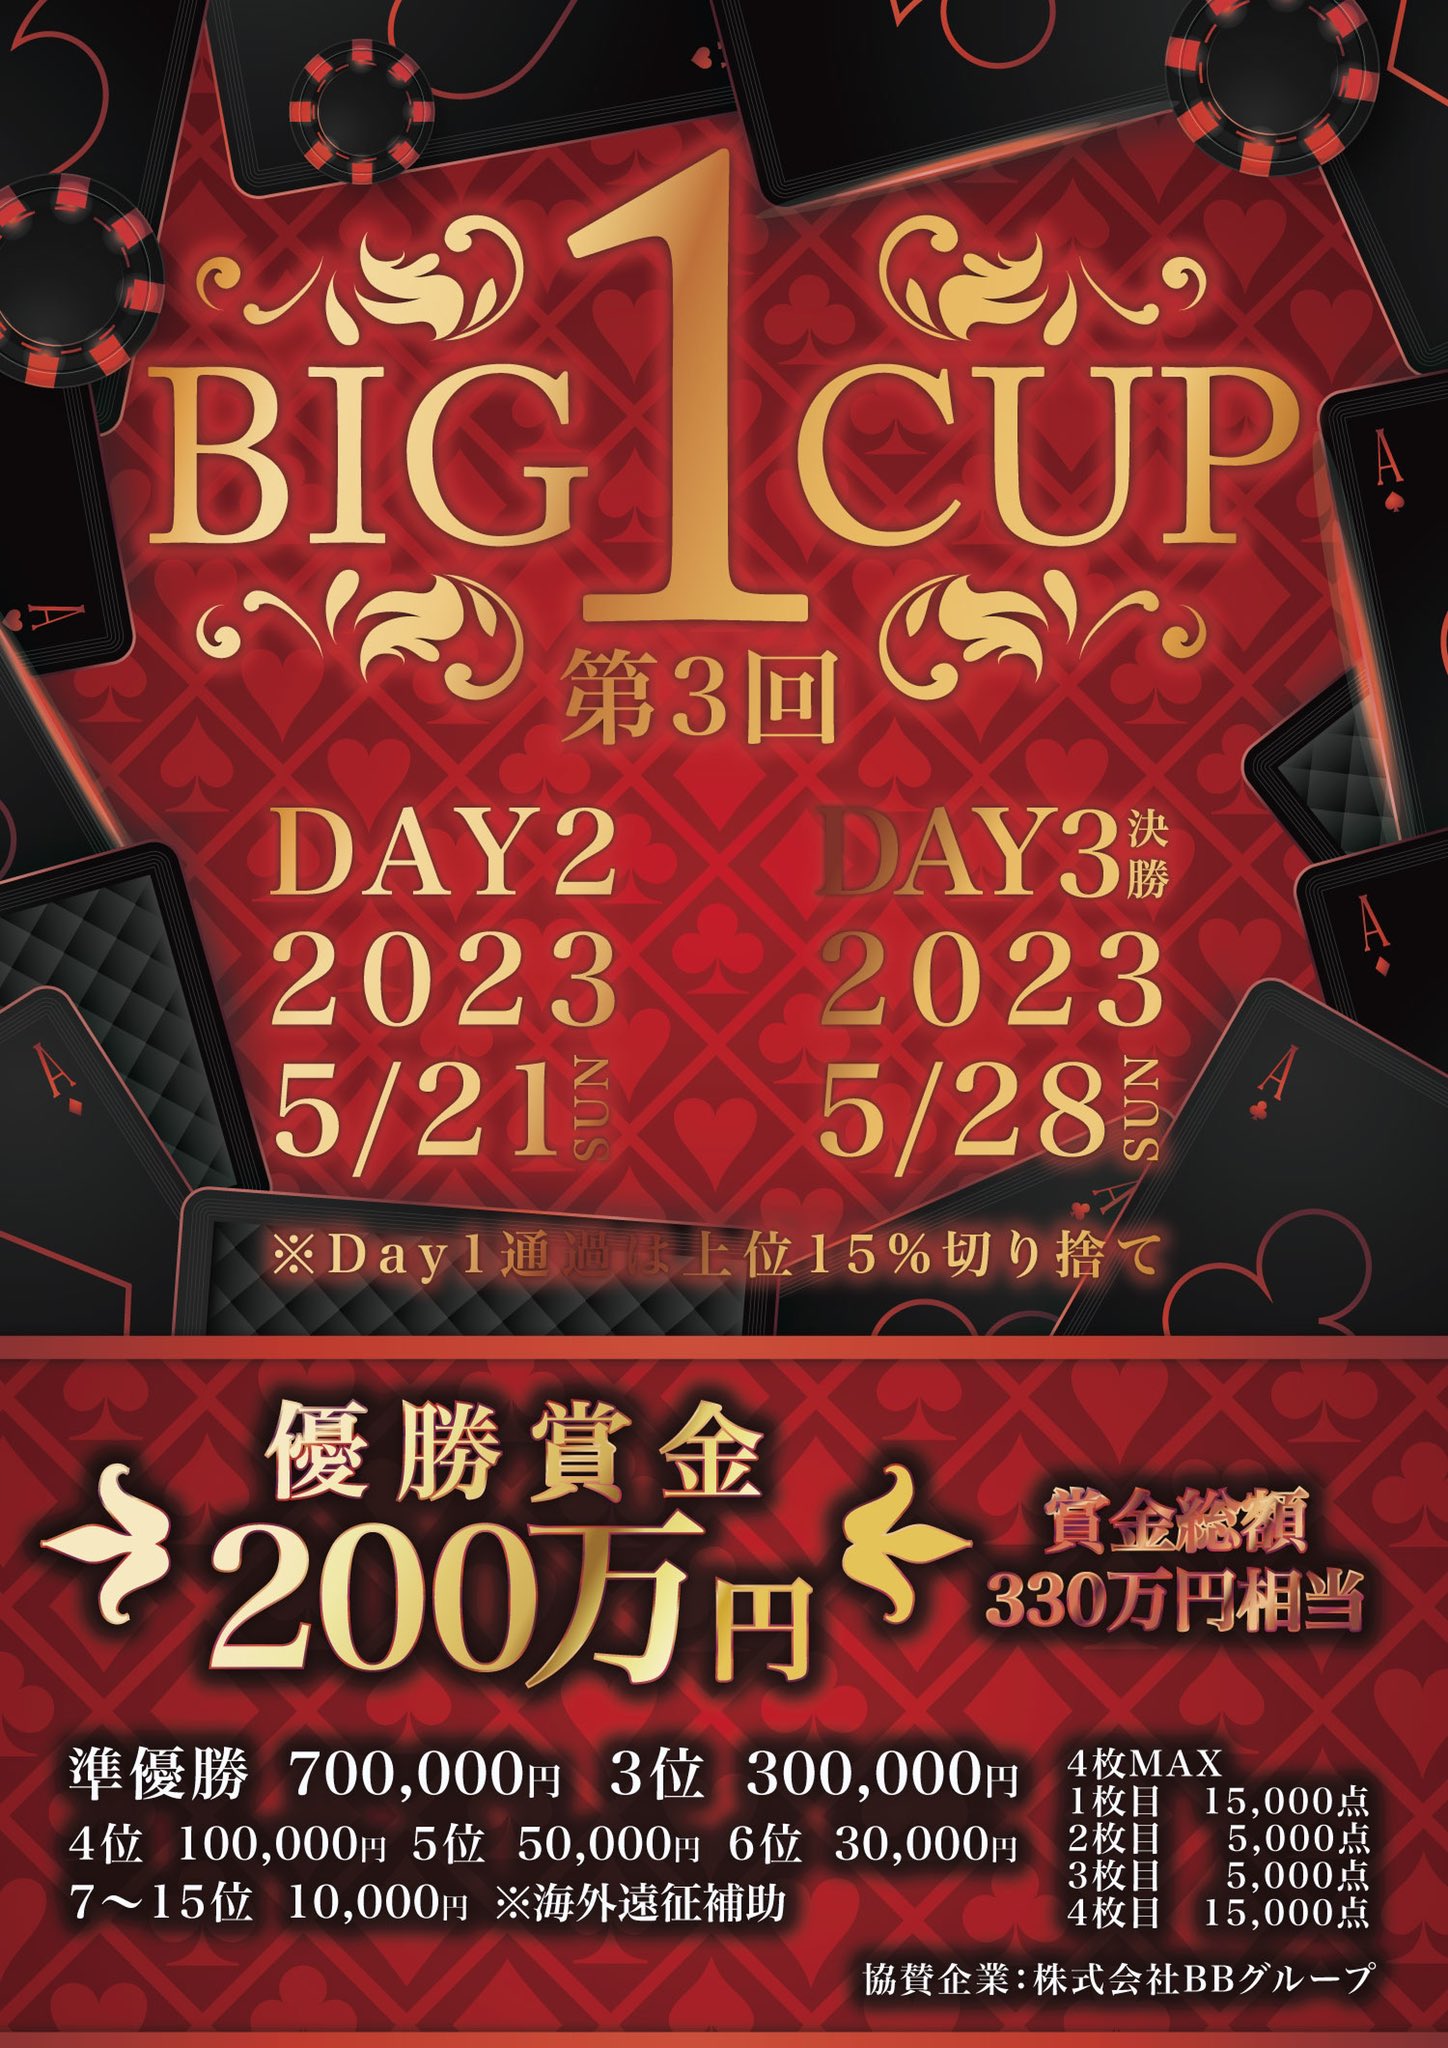 Big1cup公式 Big1 Cup Twitter